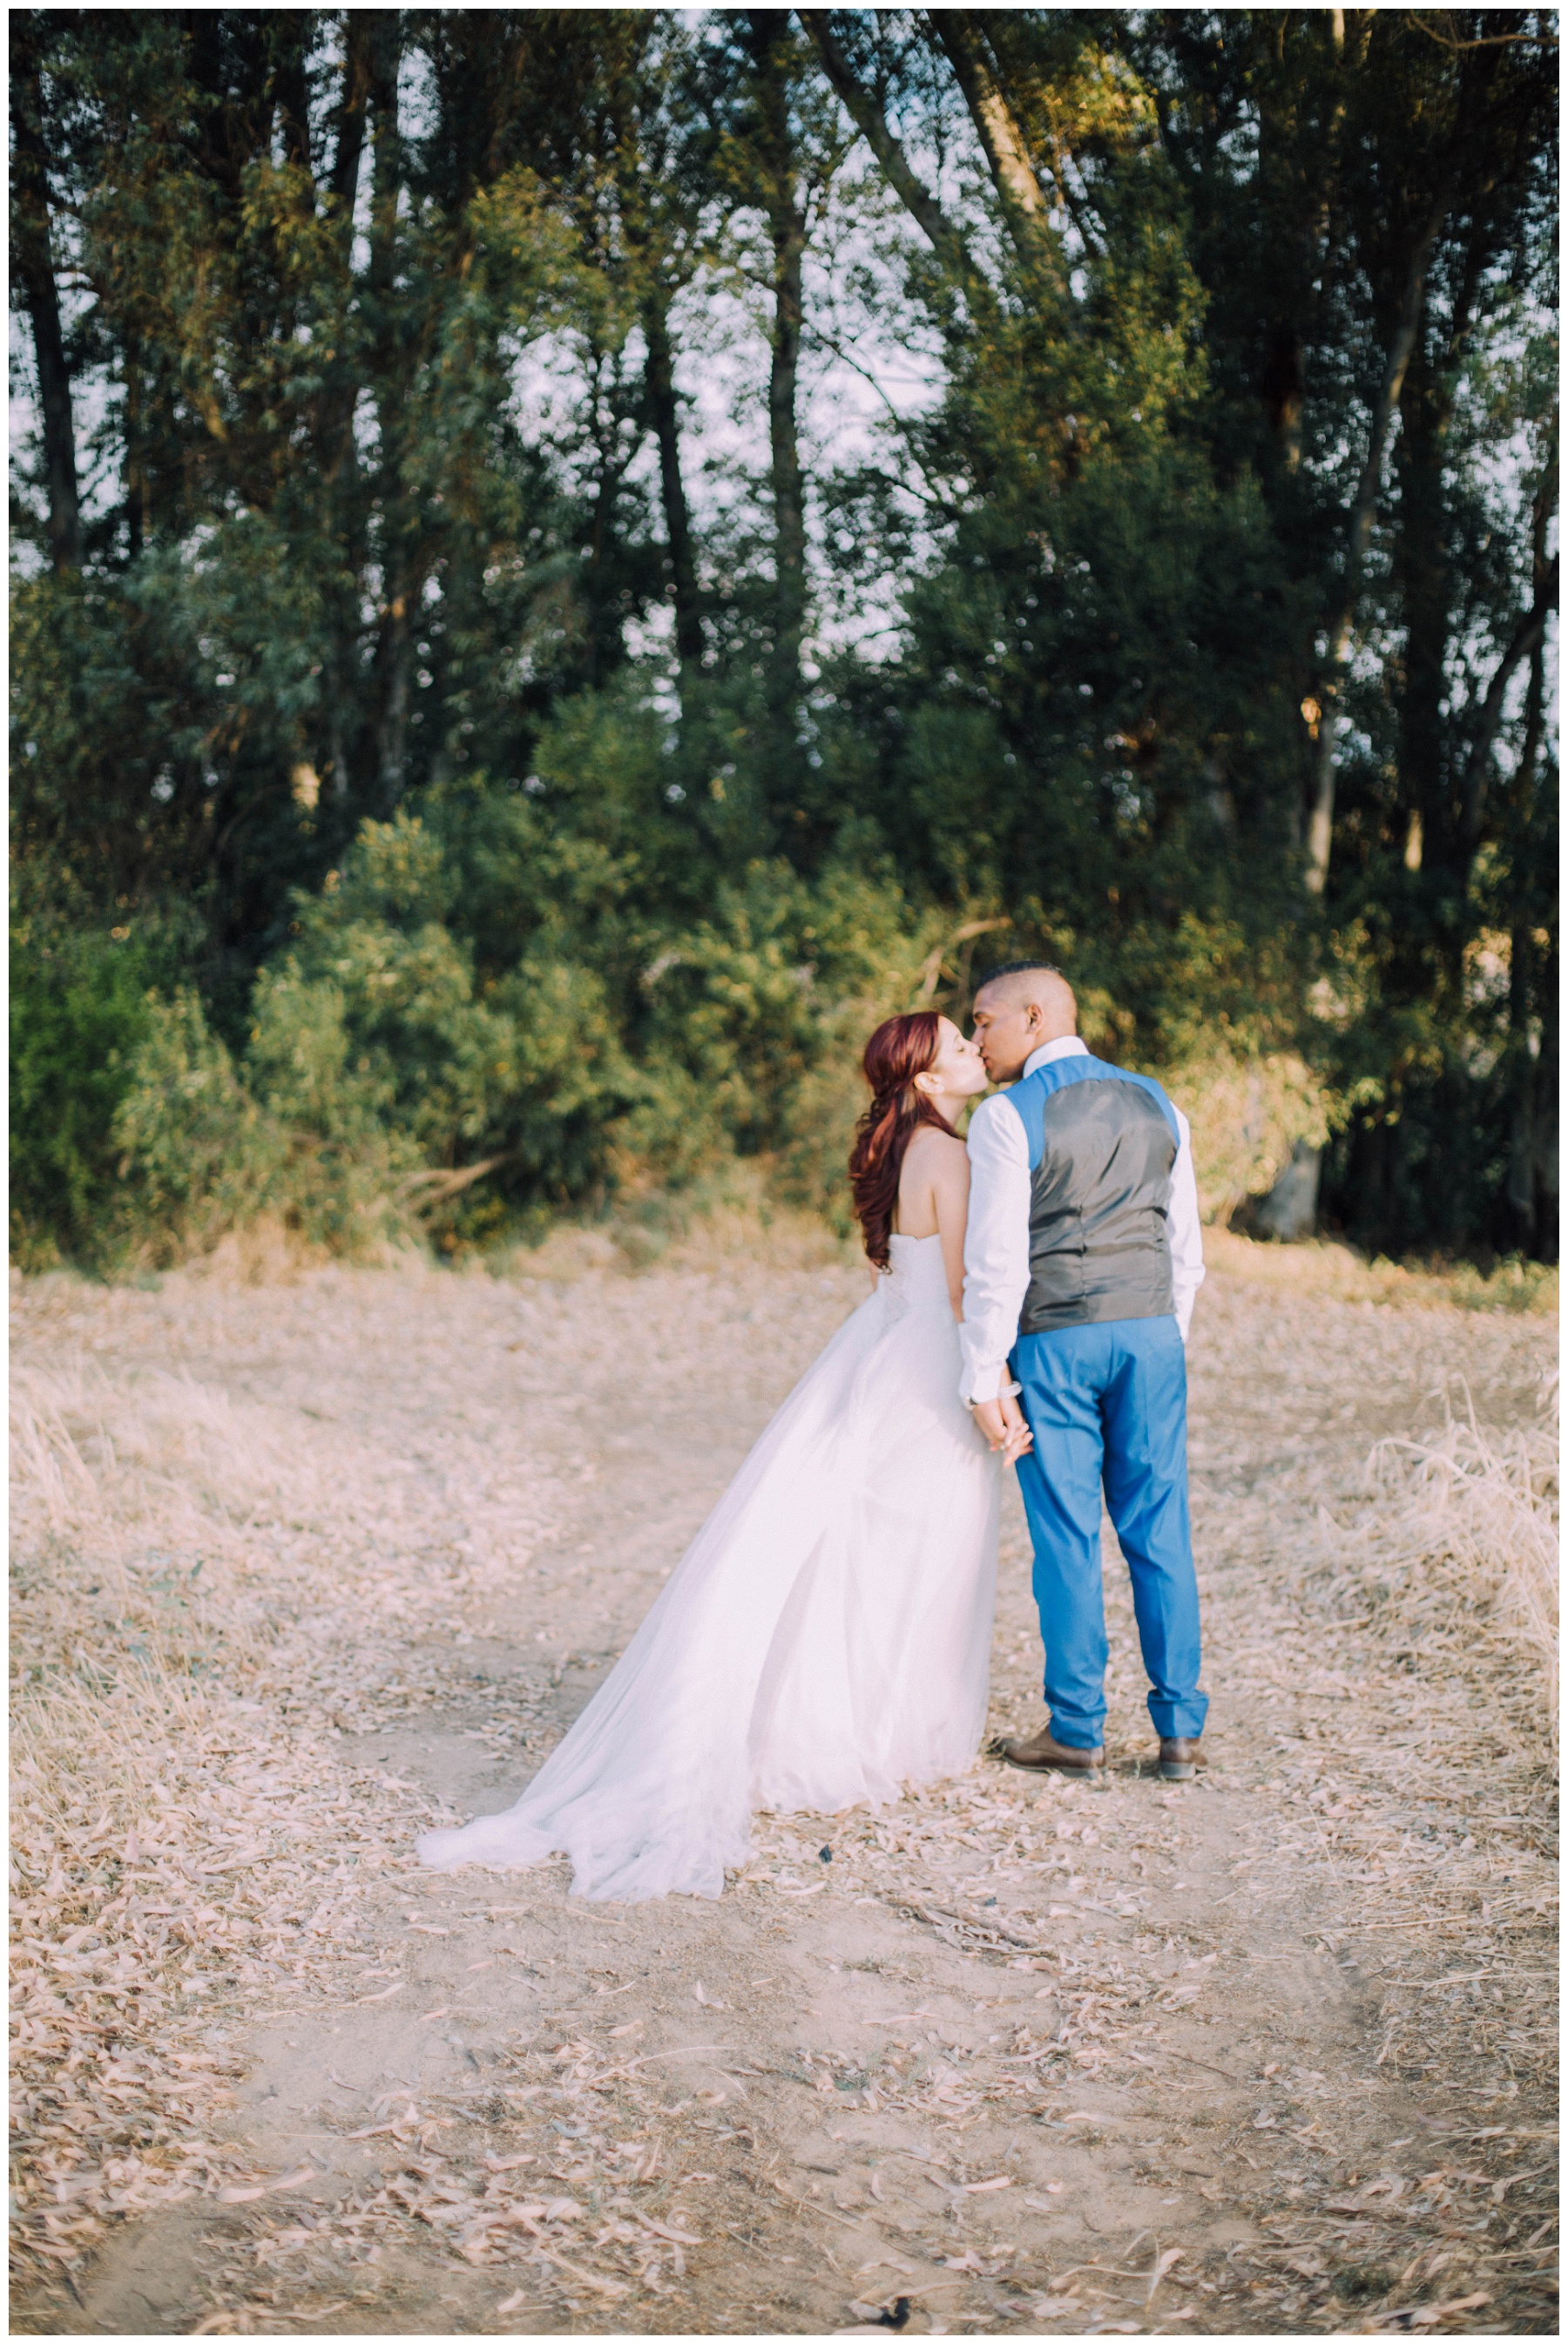 Ronel Kruger Cape Town Wedding and Lifestyle Photographer_1364.jpg